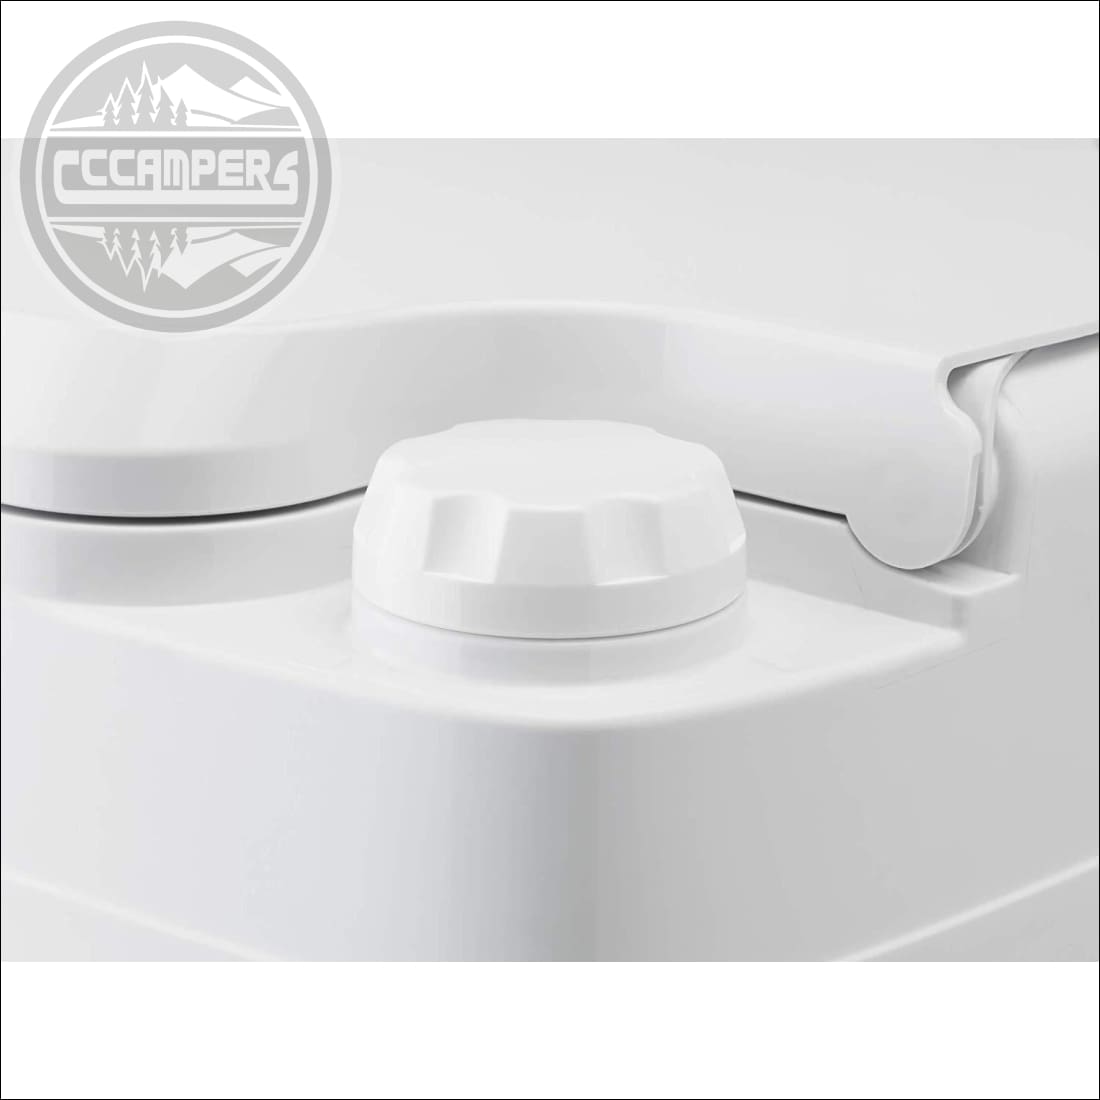 Thetford Porta Potti Qube 335 Portable Toilet * OUT OF STOCK* - CCCAMPERS 